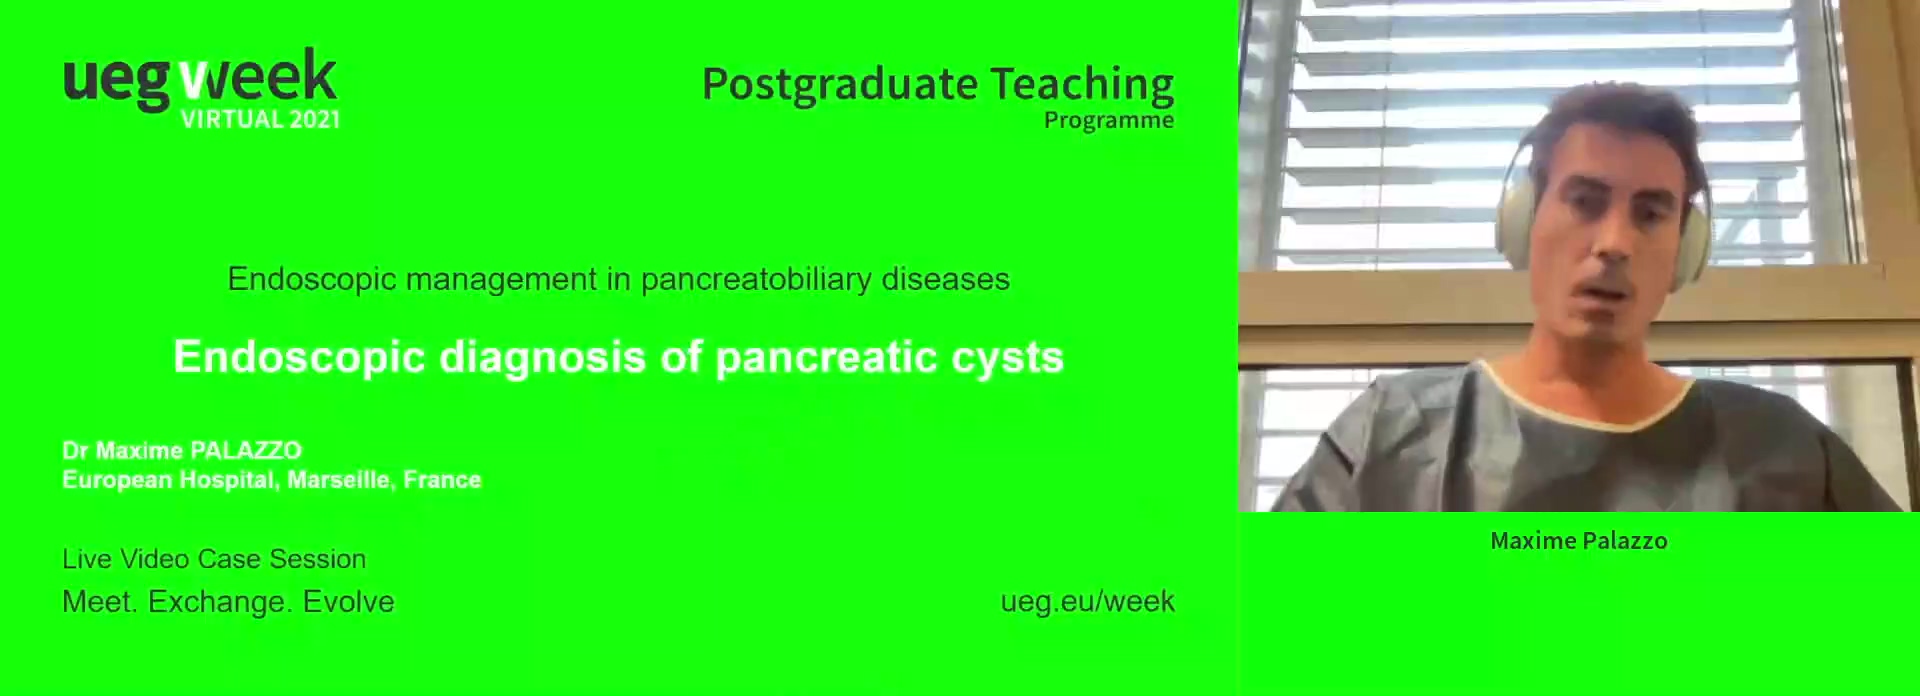 Endoscopic diagnosis of pancreatic cysts